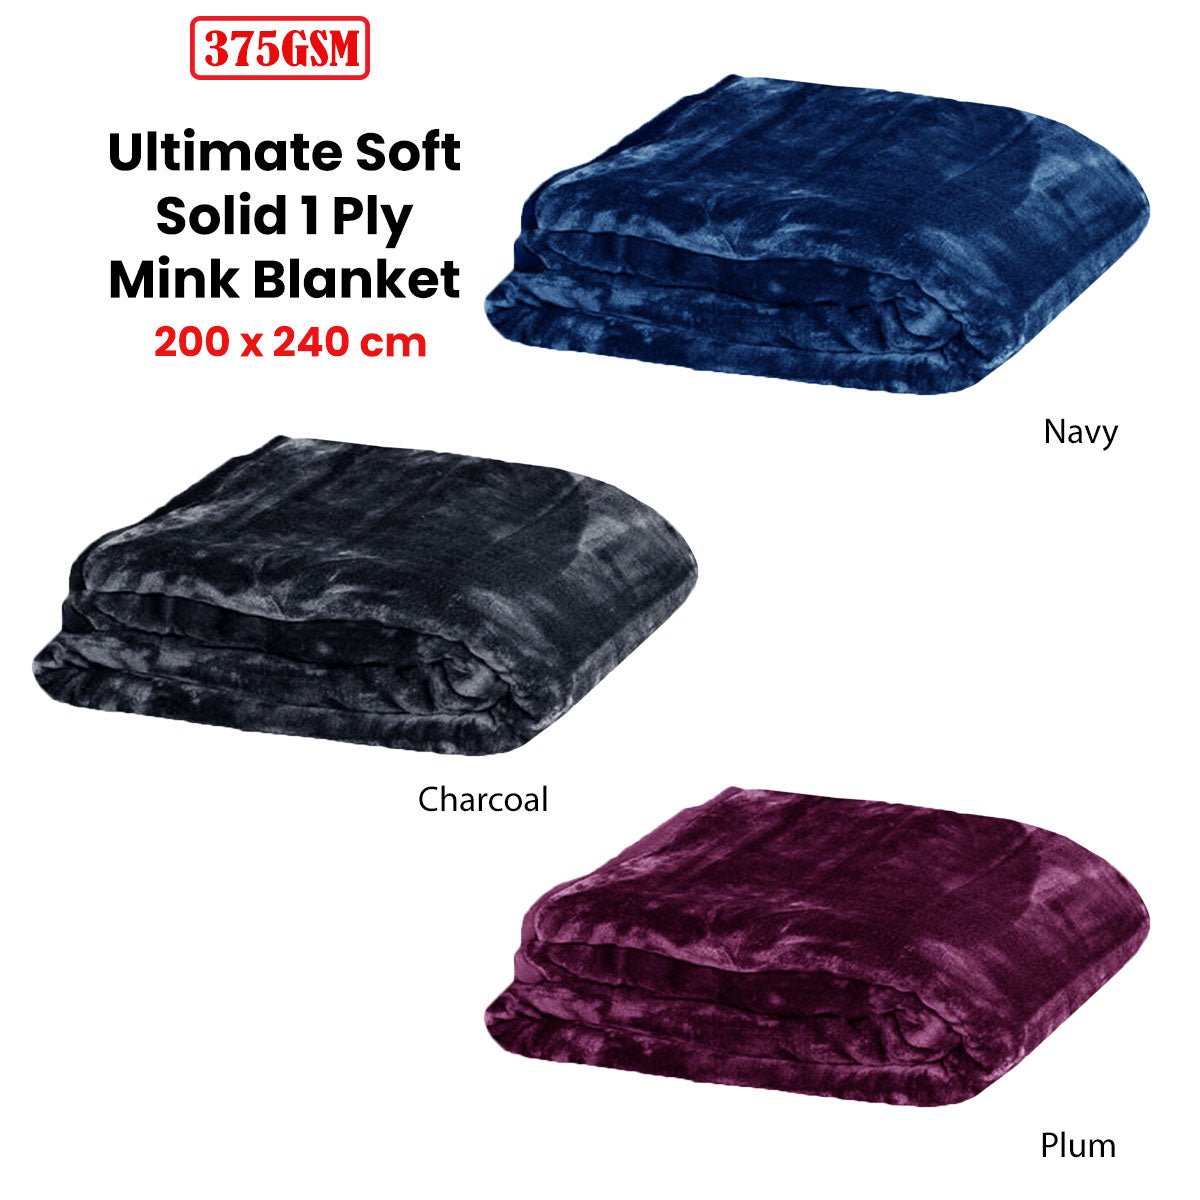 375gsm 1 Ply Solid Faux Mink Blanket Queen 200x240 cm Charcoal - Newstart Furniture